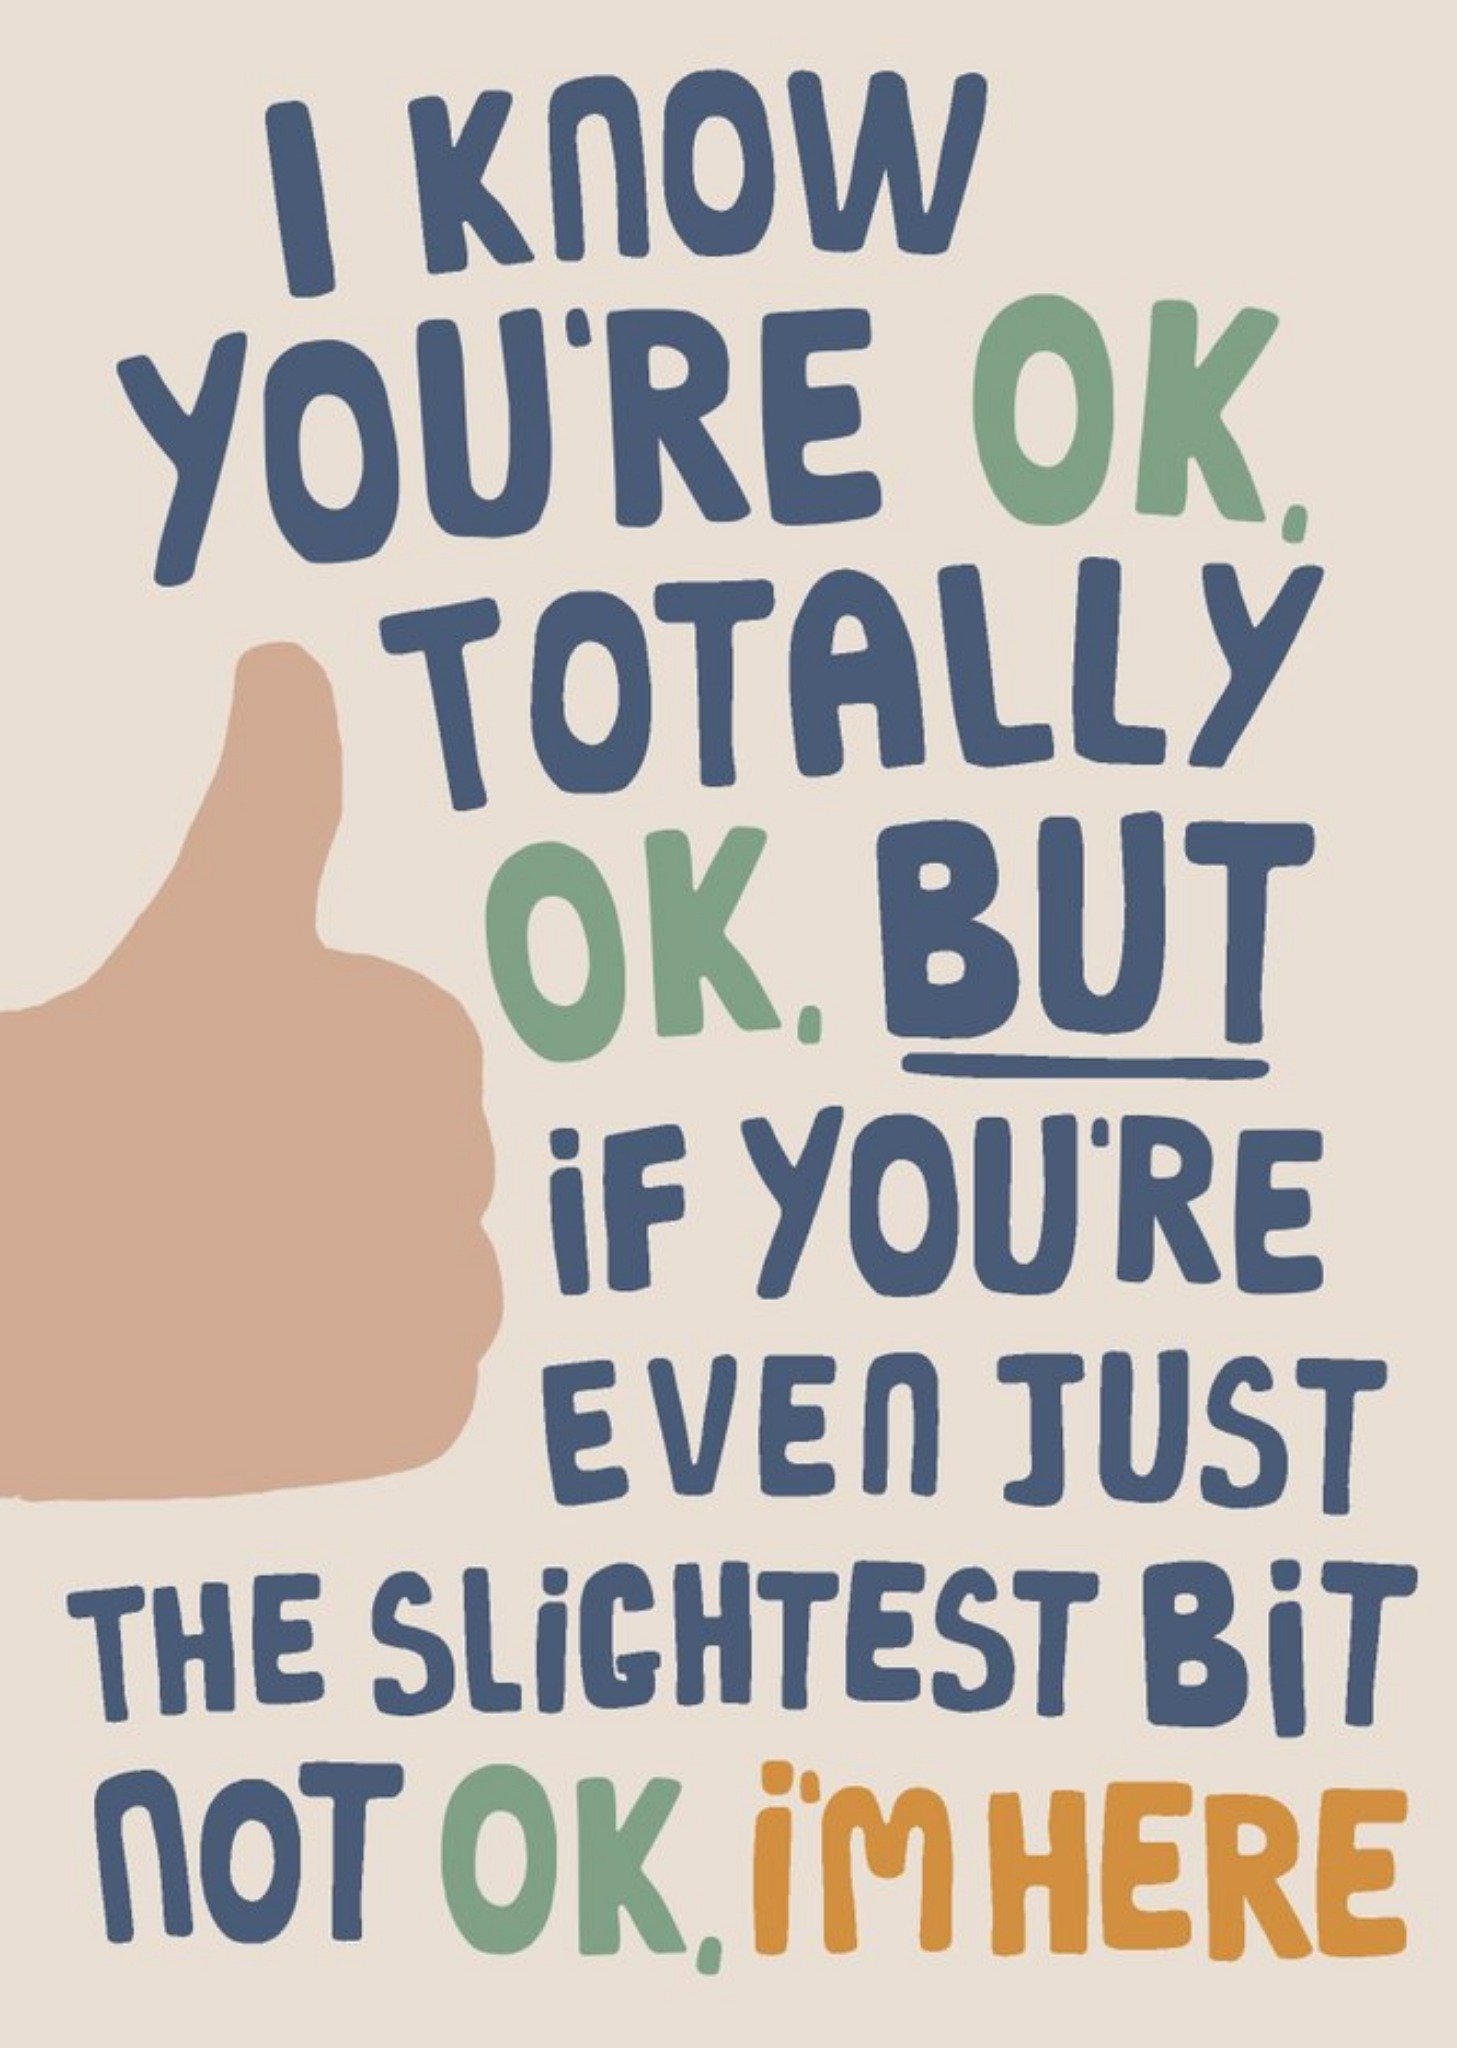 Moonpig Typographic If You're Not Even Just The Slightest Bit Not Ok, I'm Here Card Ecard